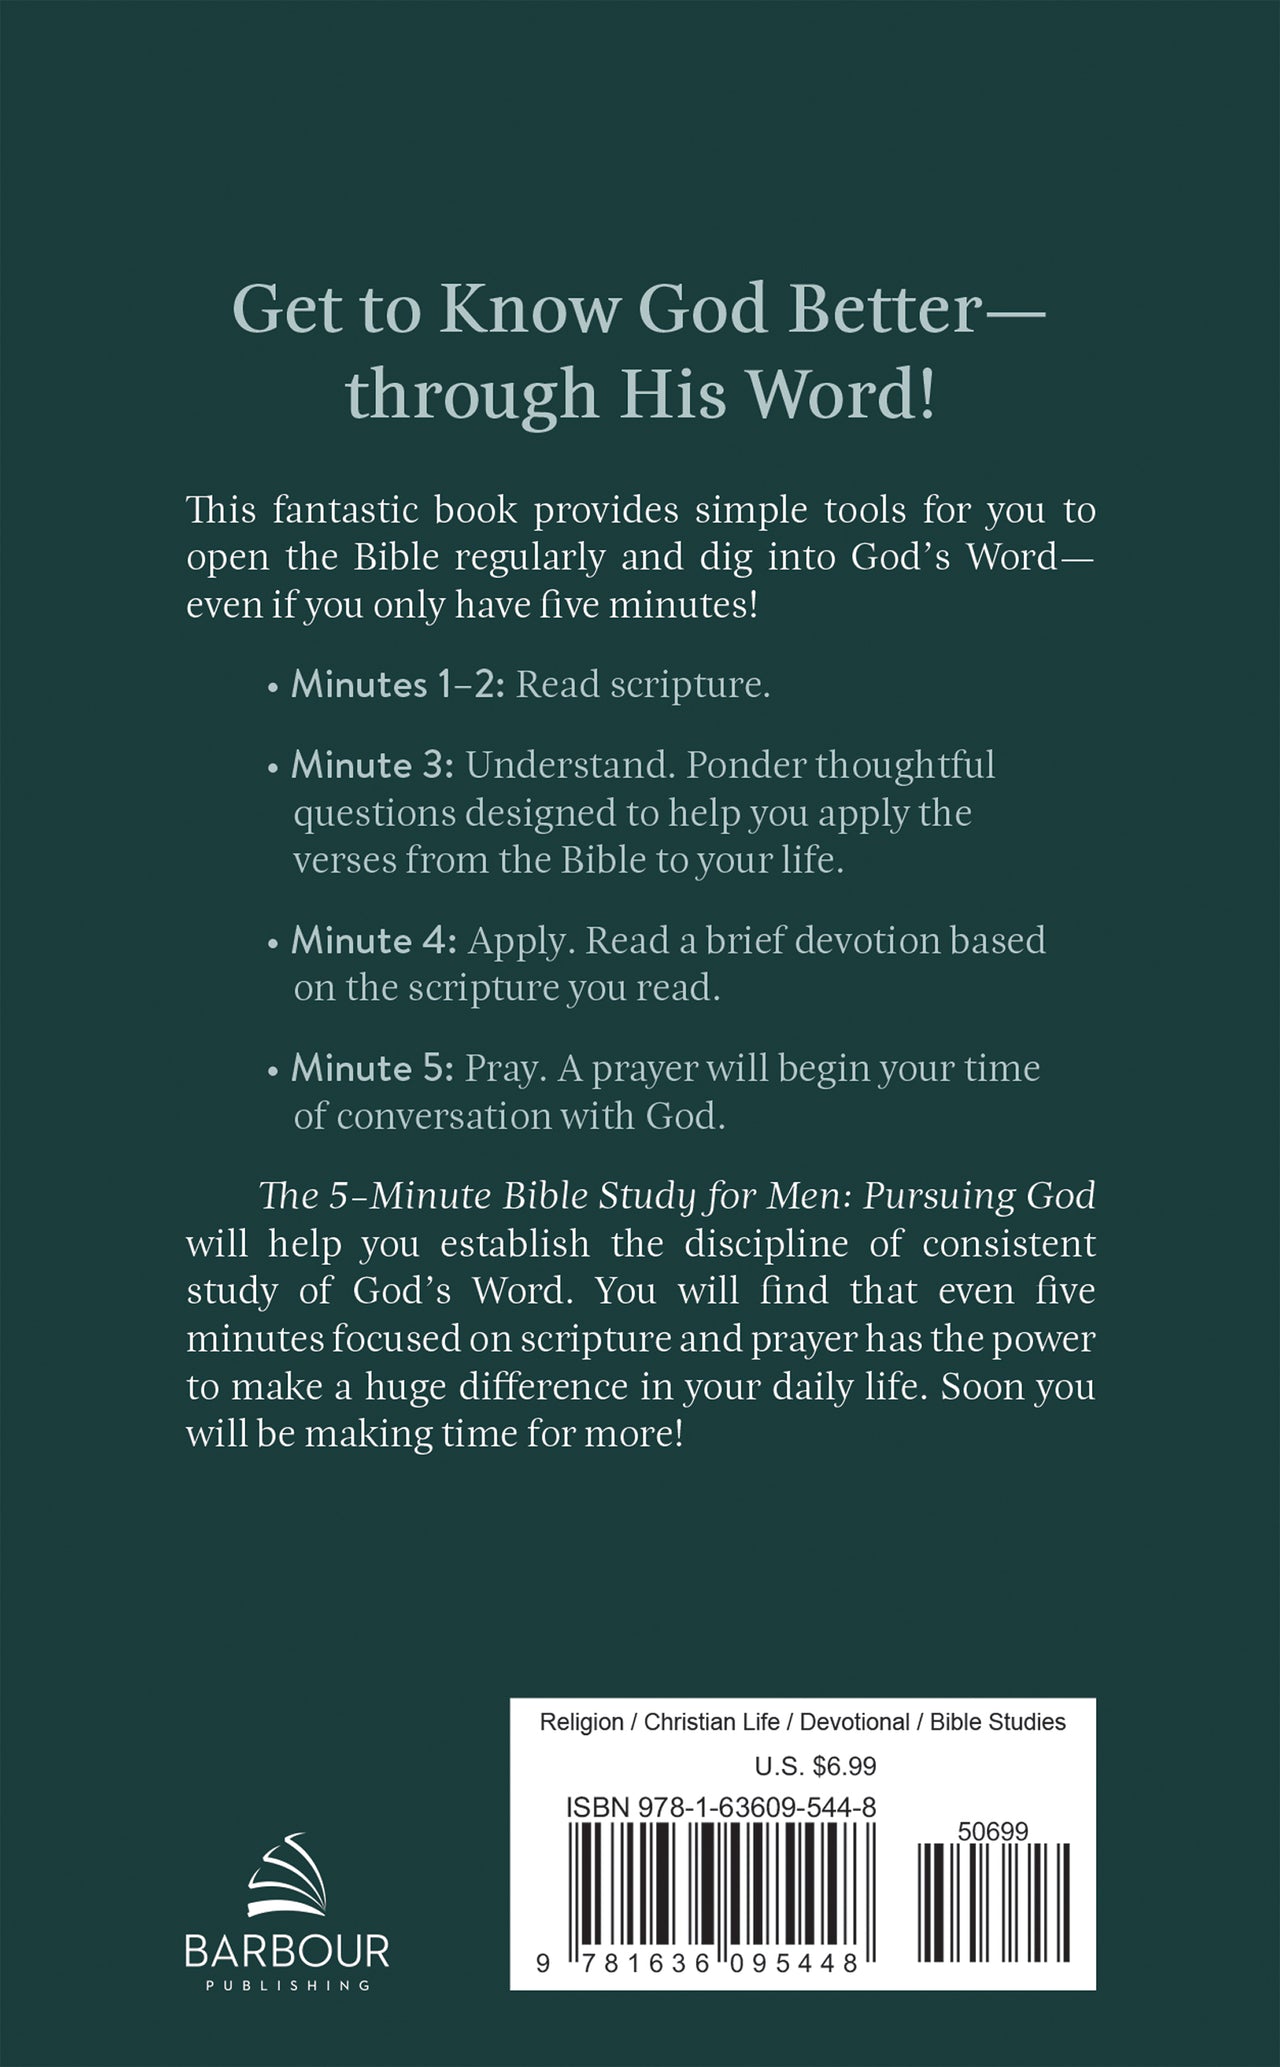 The 5-Minute Bible Study for Men: Pursuing God - Mercantile Mountain